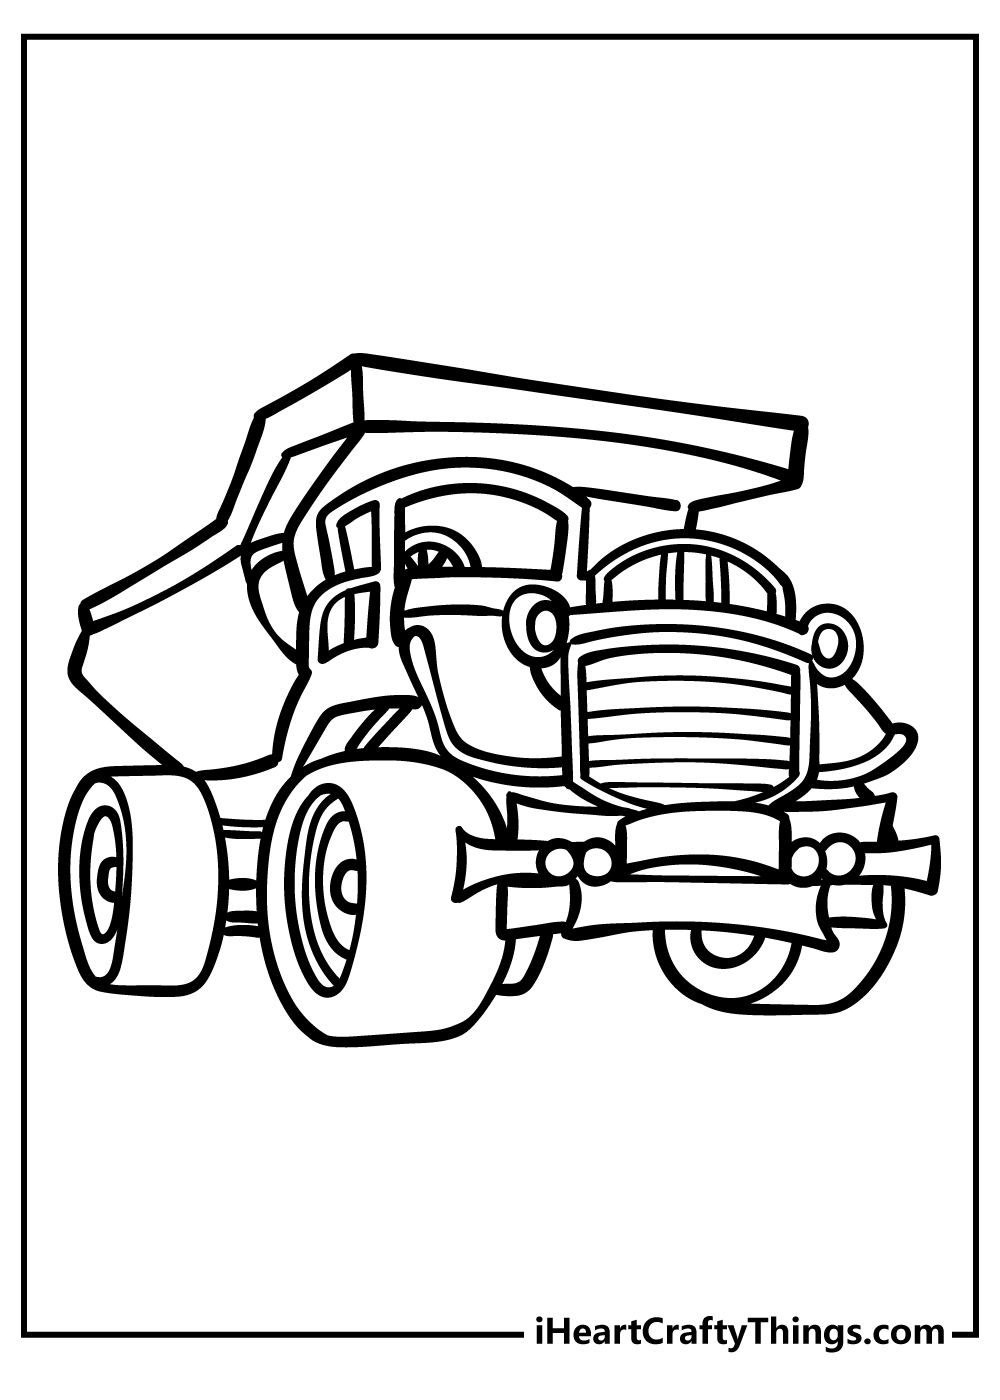 For Boys Coloring Pages free printable